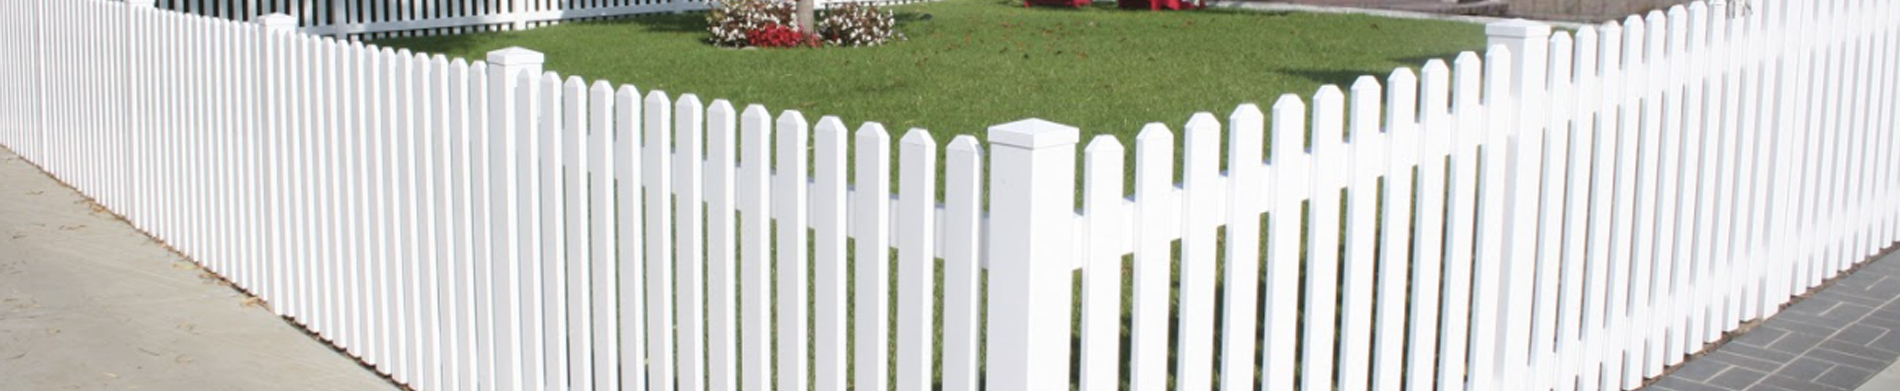 Install a vinyl fence panel to make your property secure and beautiful